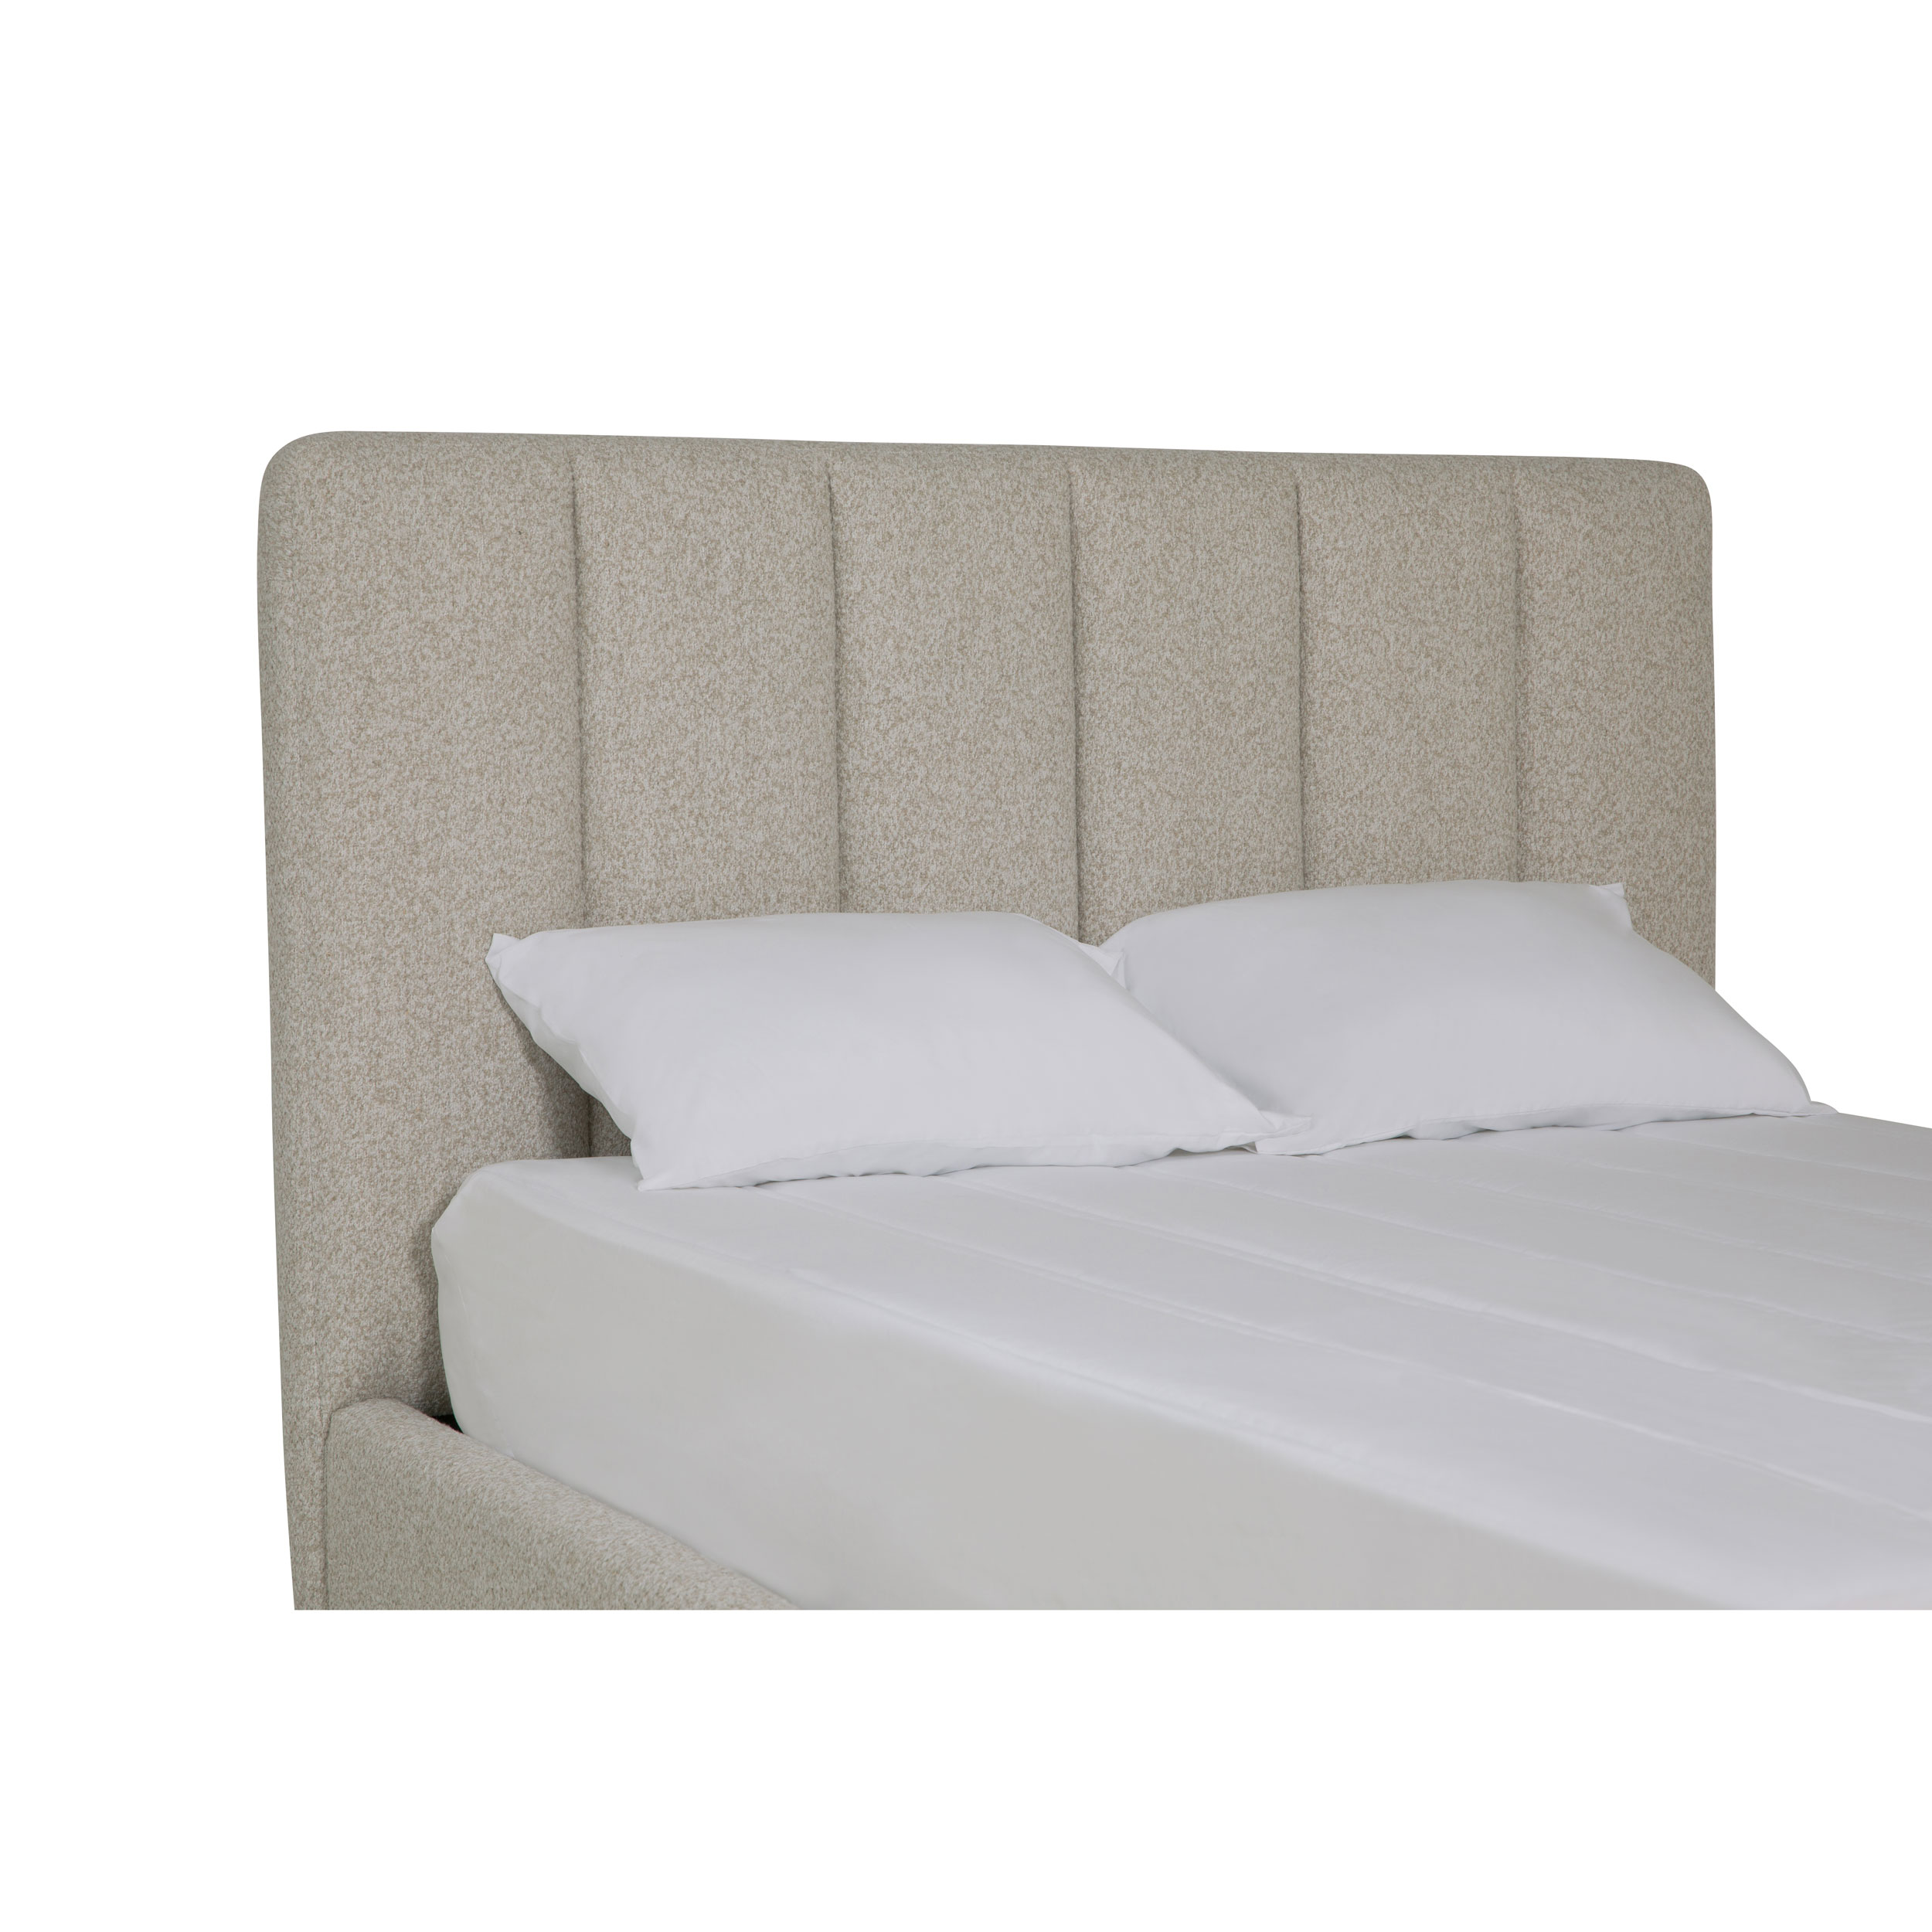 Mid-Century_Modern_styled_upholstered_headboard_queen